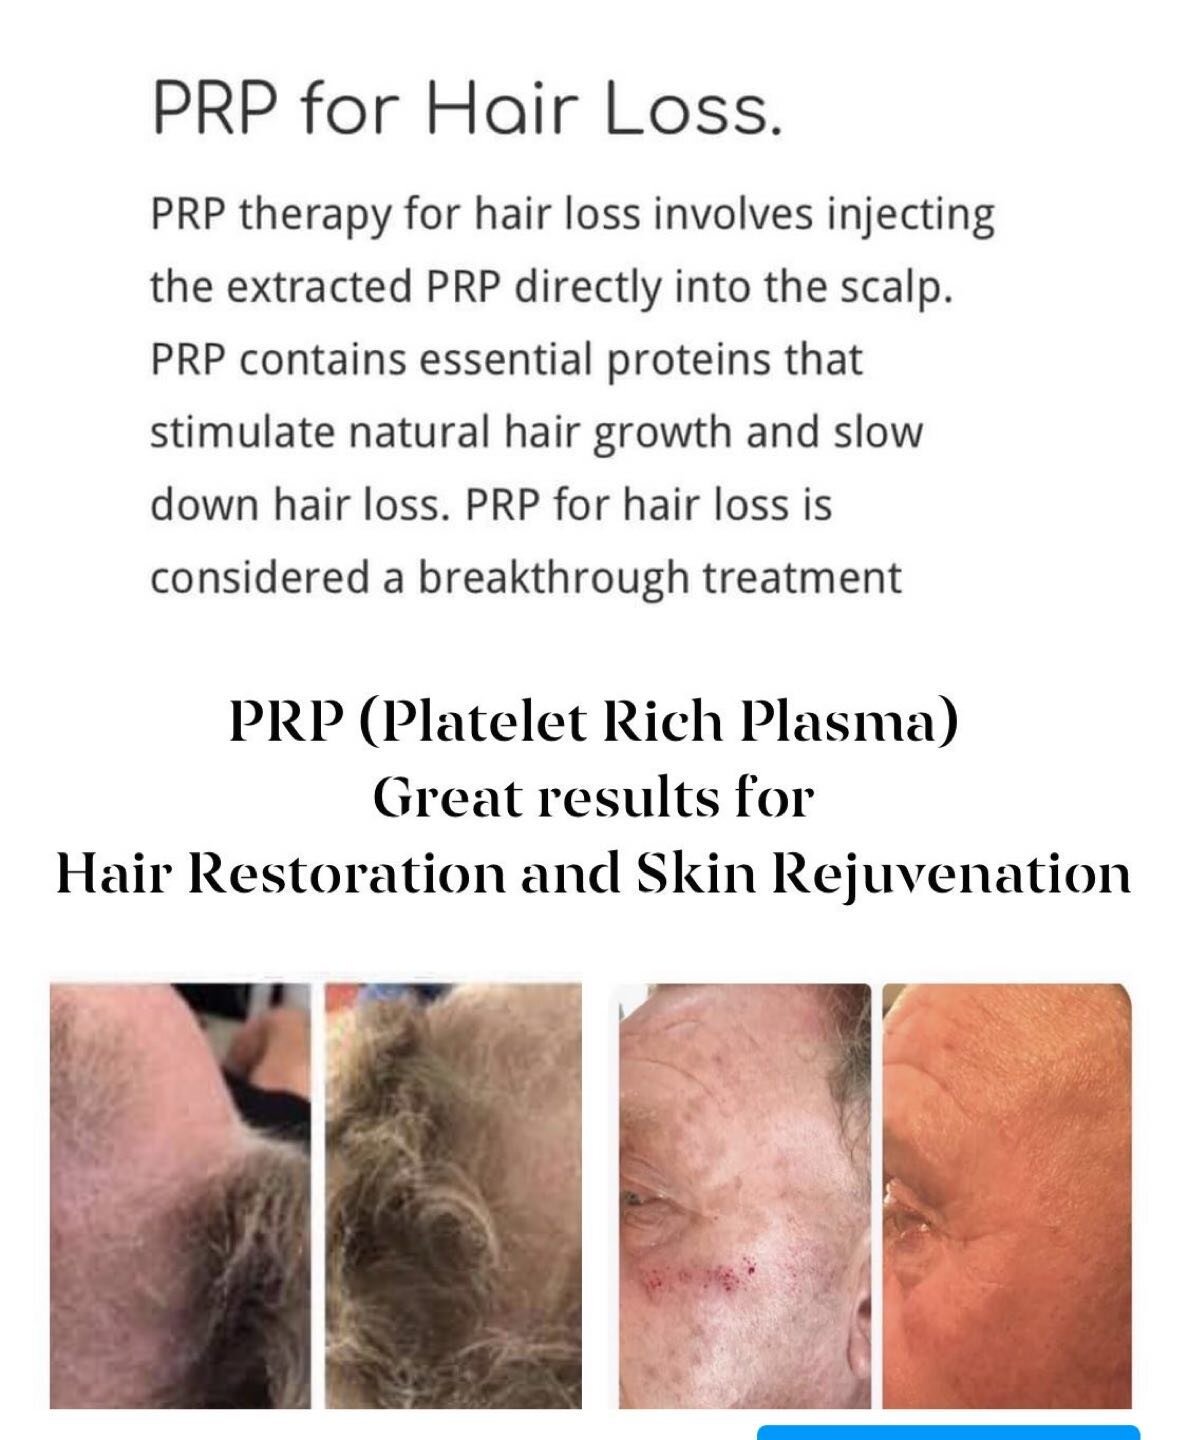 PRP for hair loss!  Amazing results!